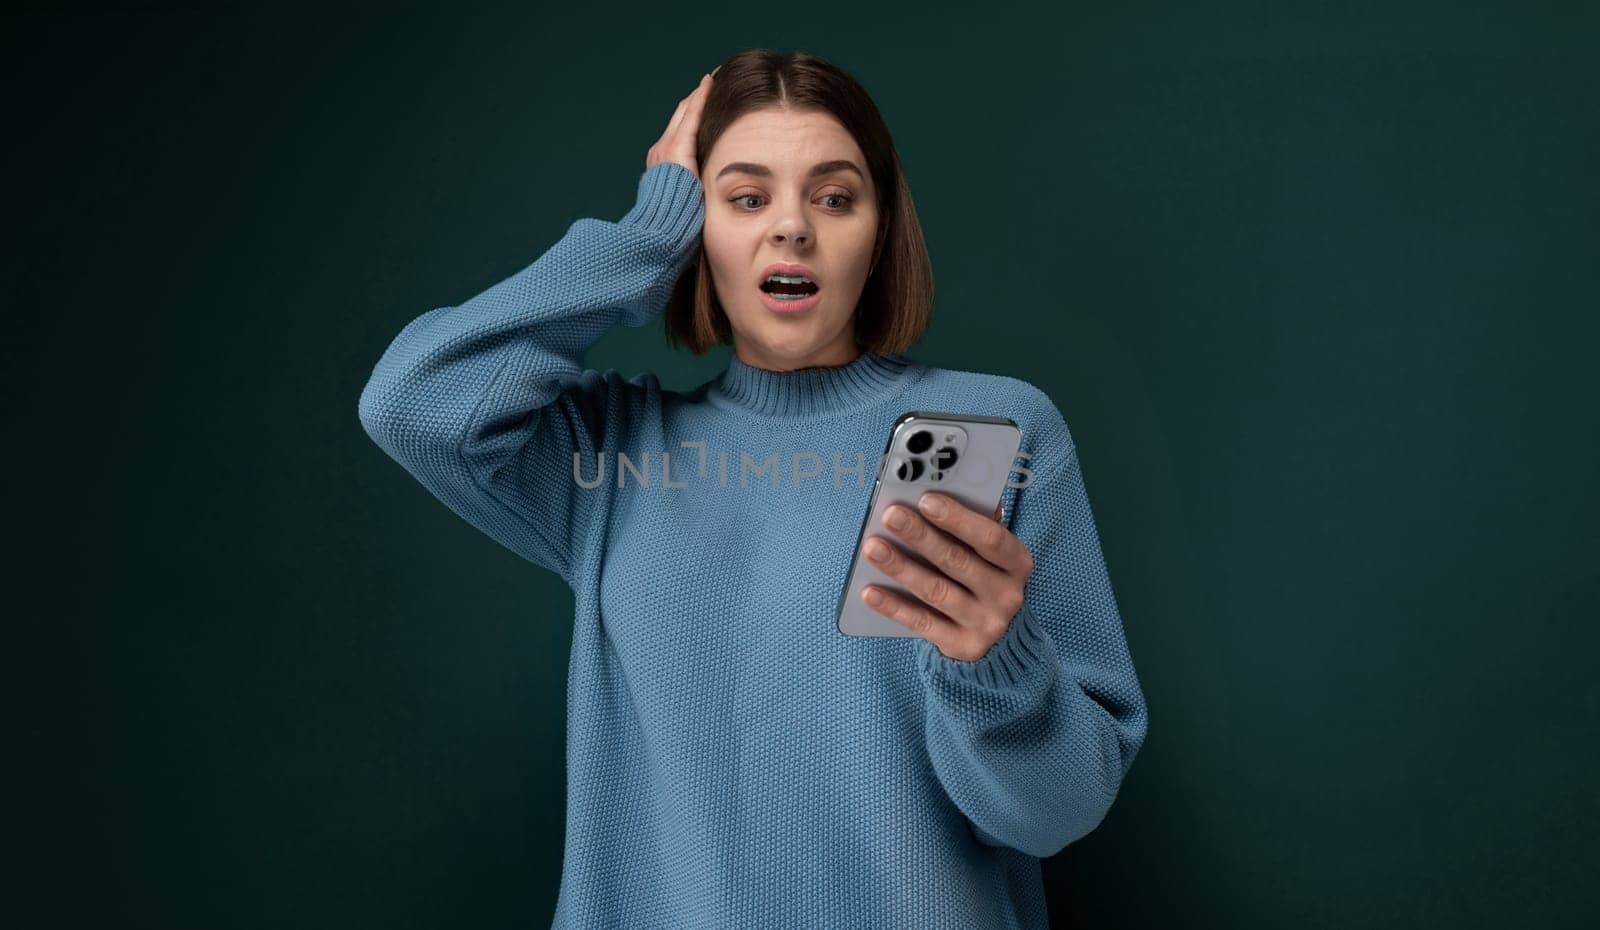 A woman wearing a blue sweater is holding a cell phone in her hand. She appears to be focused on the screen, possibly texting or browsing.